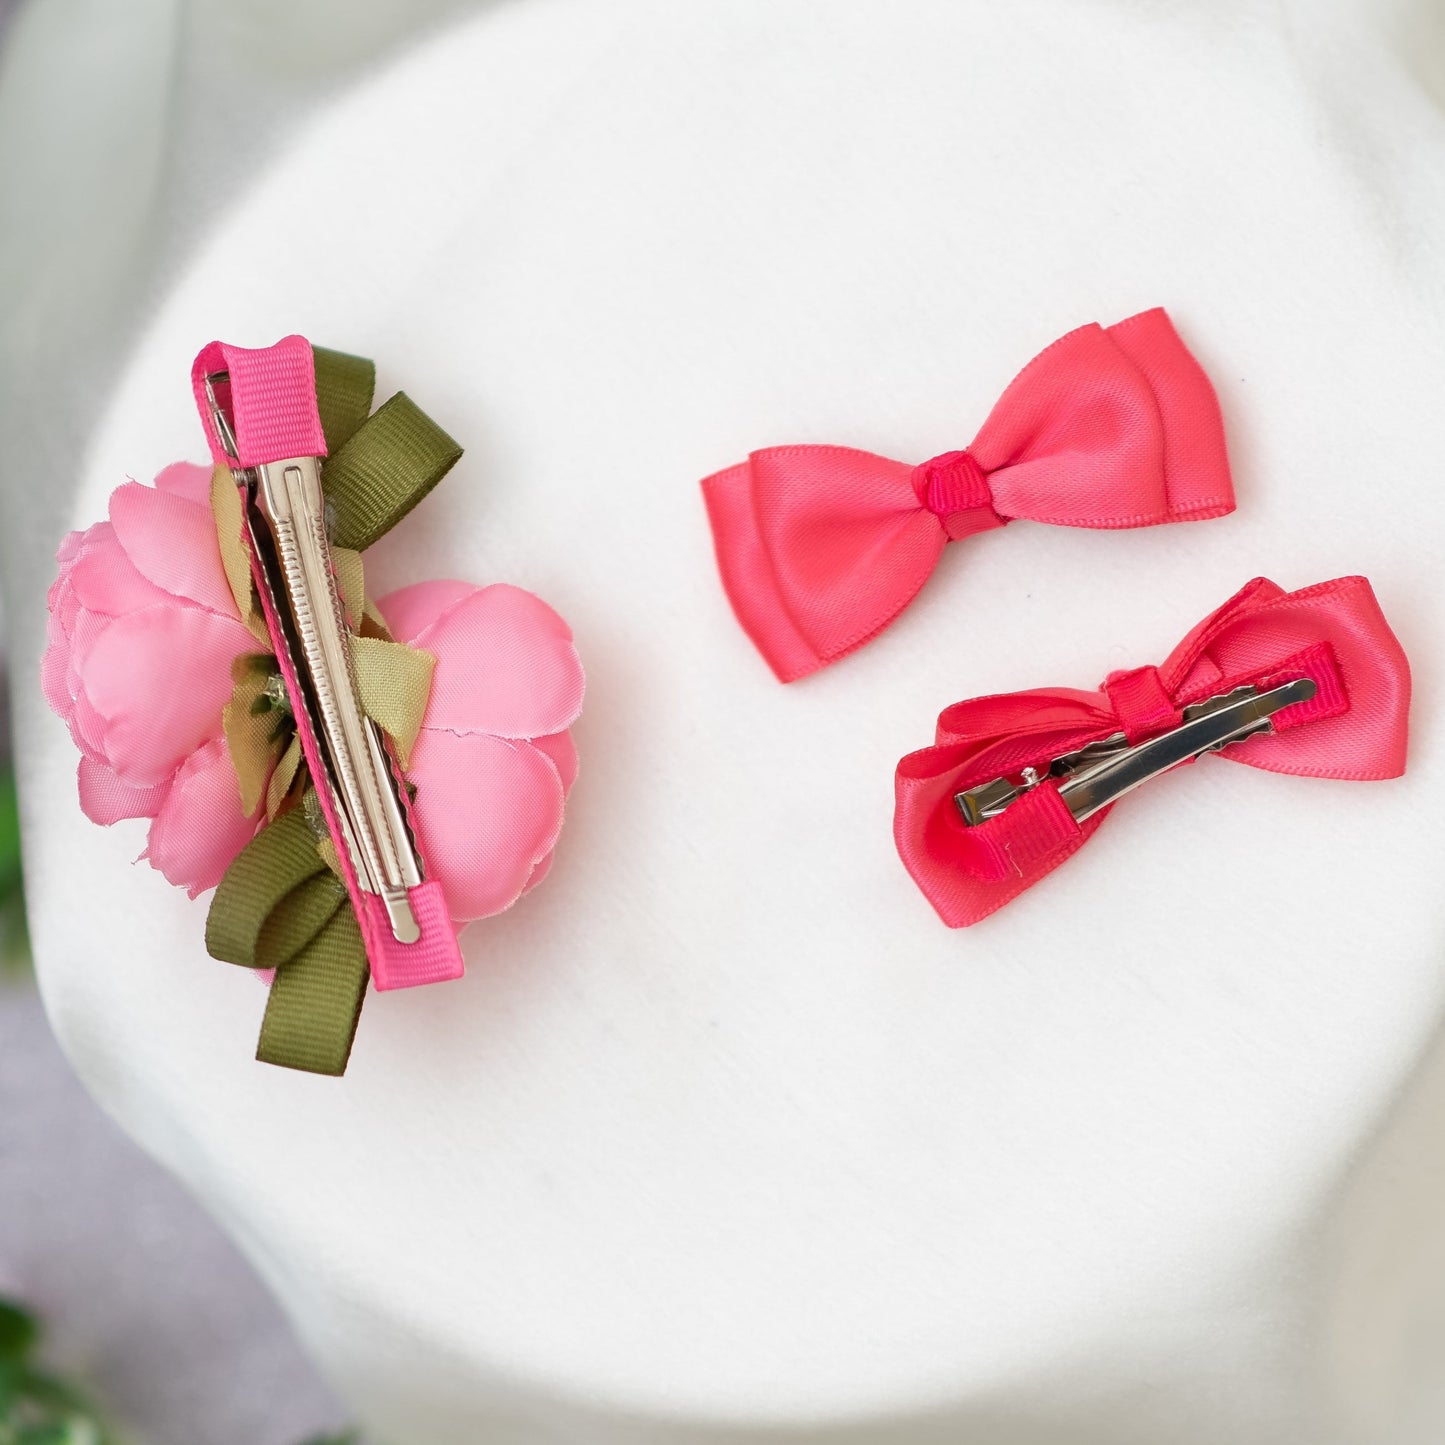 Decorative flower ornamented on alligator clip along with shiny satin double bow alligator clips - Pink (Set of 1 pair and 1 single clip - 3 quantity)